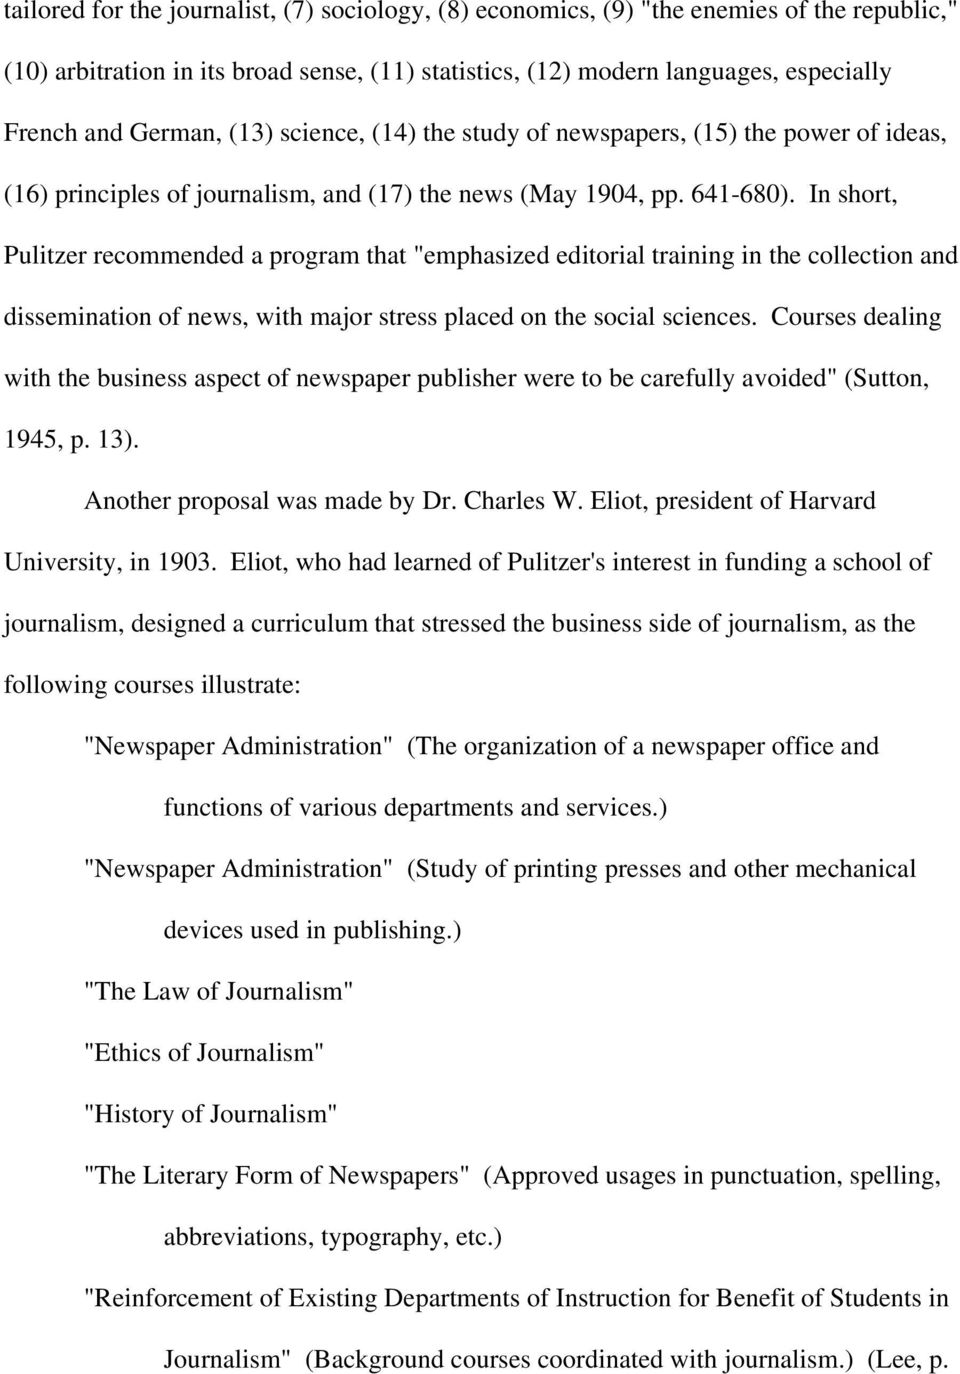 In short, Pulitzer recommended a program that "emphasized editorial training in the collection and dissemination of news, with major stress placed on the social sciences.